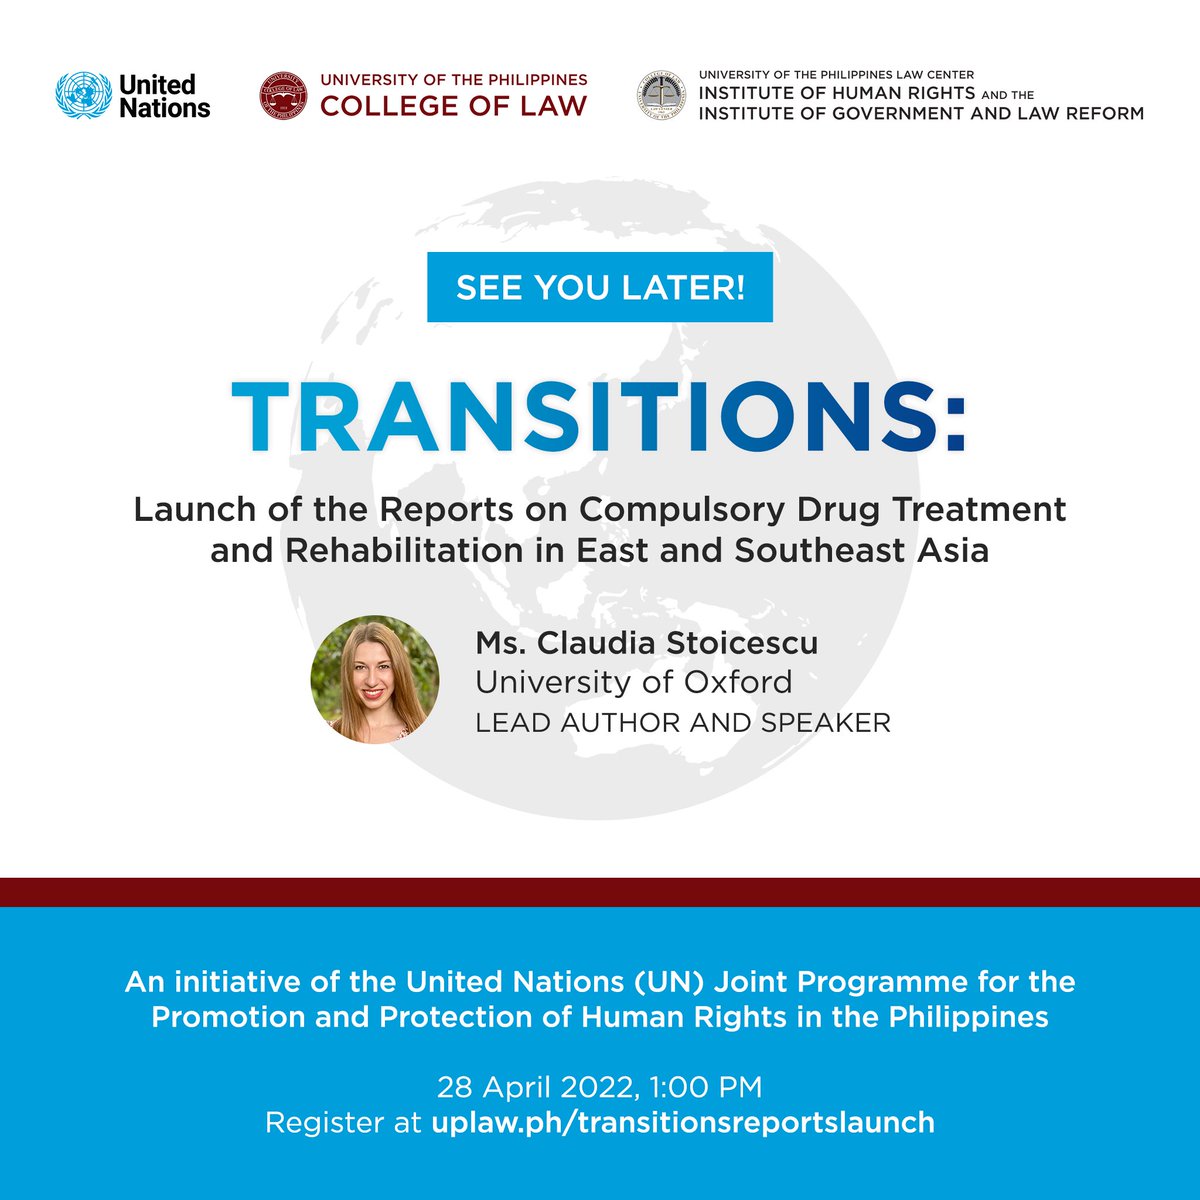 See you all in the United Nations and UP Law Event: TRANSITIONS: Launch of the Reports on Compulsory Drug Treatment and Rehabilitation in East and Southeast Asia.

Zoom link as follows: uplaw.ph/transitionsrep…

#UnitedNations #UPLaw #TRANSITIONS #UNJointProgramme #HumanRights